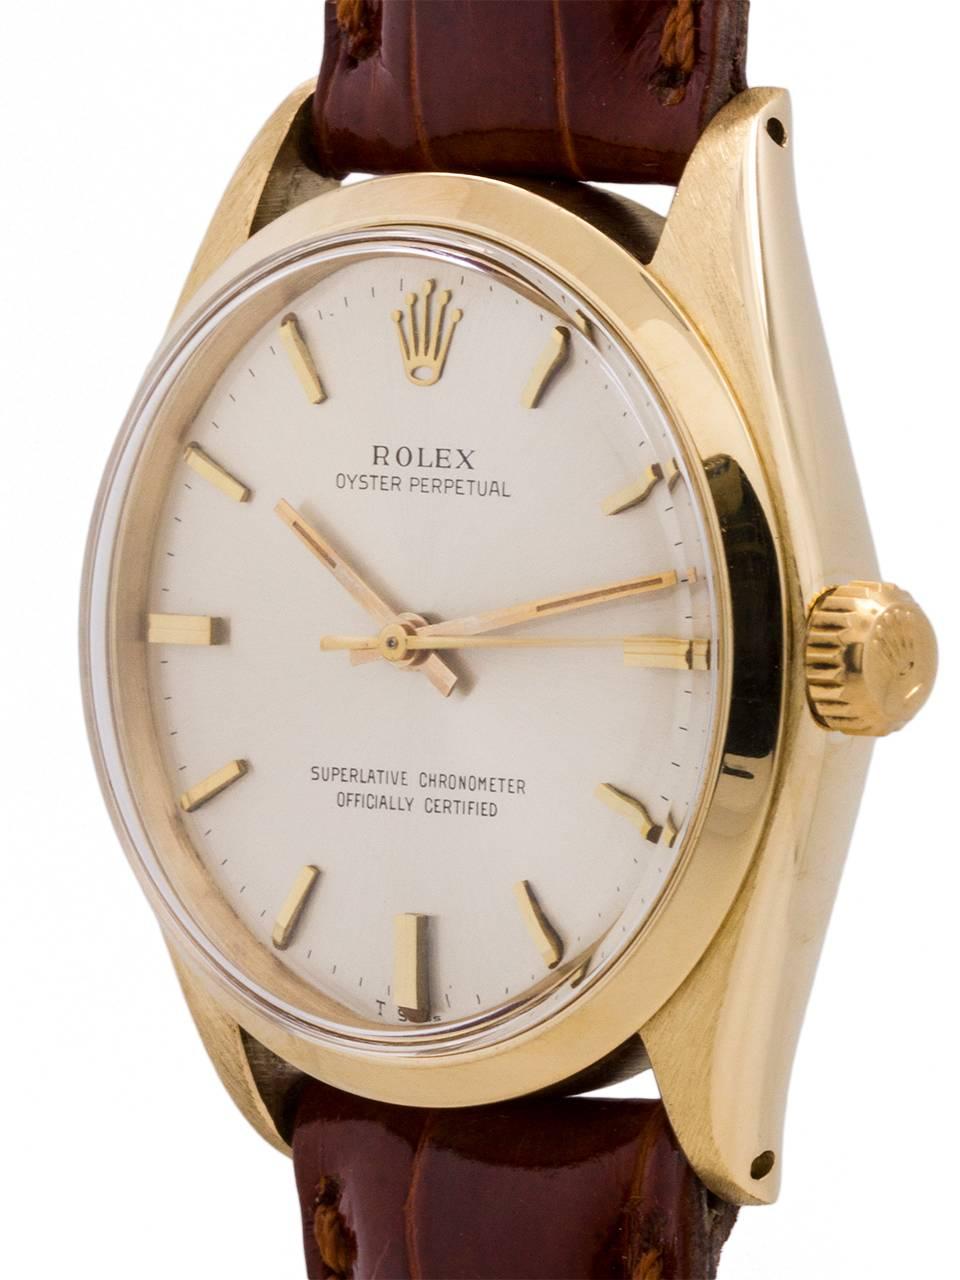 
Rolex 14K YG Oyster Perpetual ref 1005 serial # 1.0 million circa 1965 complete with original box and large chronometer certificate. Featuring a 34m diameter case with smooth bezel and acrylic crystal and original silvered satin dial with gold